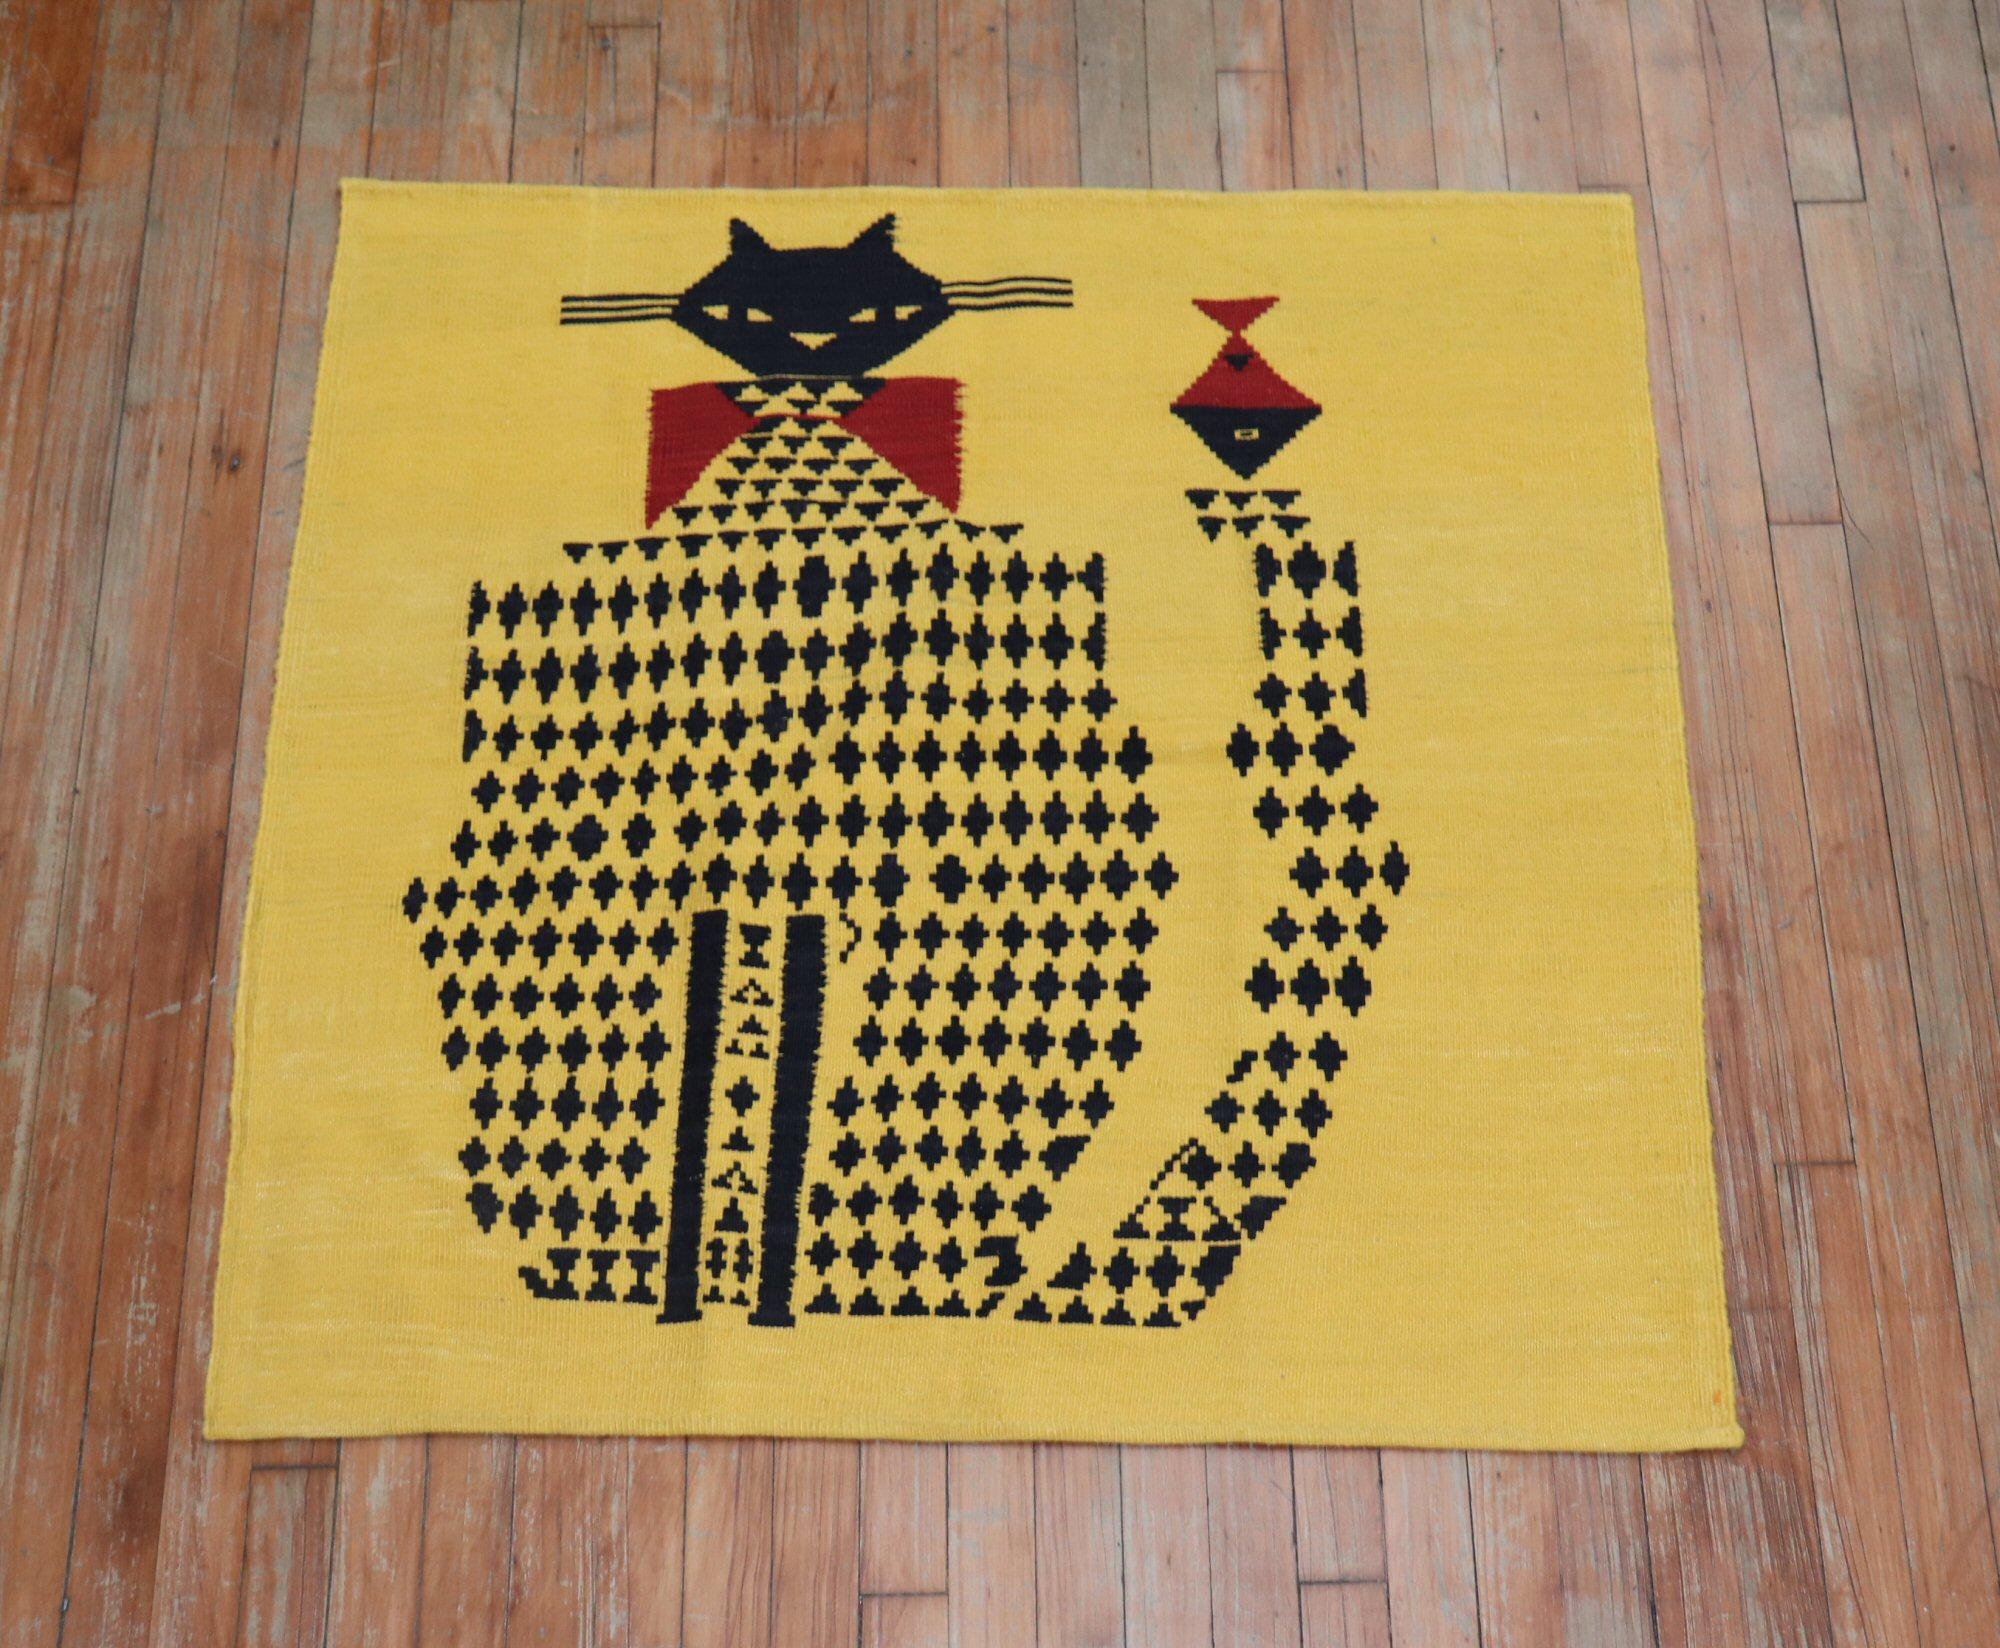 Square scatter size Persian Kilim from the mid-20th century with a kitten on a yellow field. This was originally belonging to a private Persian collector who requested to make a custom collection of flat-weaves back in the 1960s with quirky themes